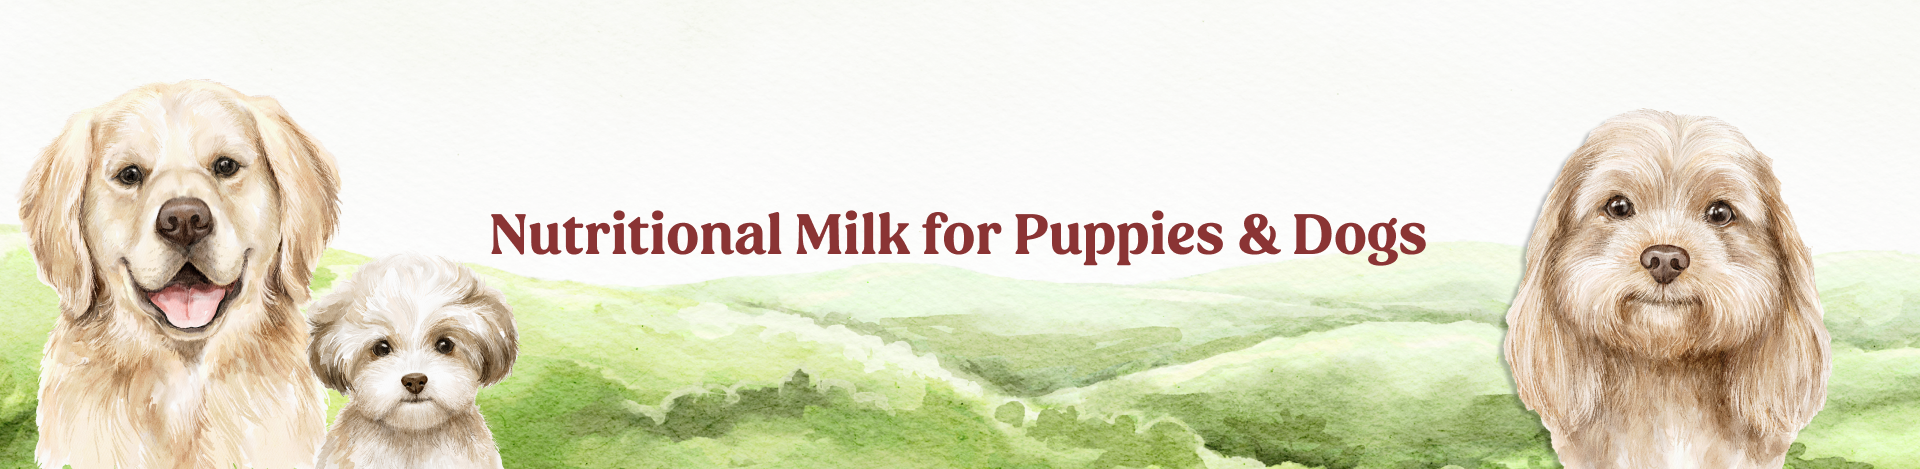 Nutritional Milk for Puppies & Dogs Banner